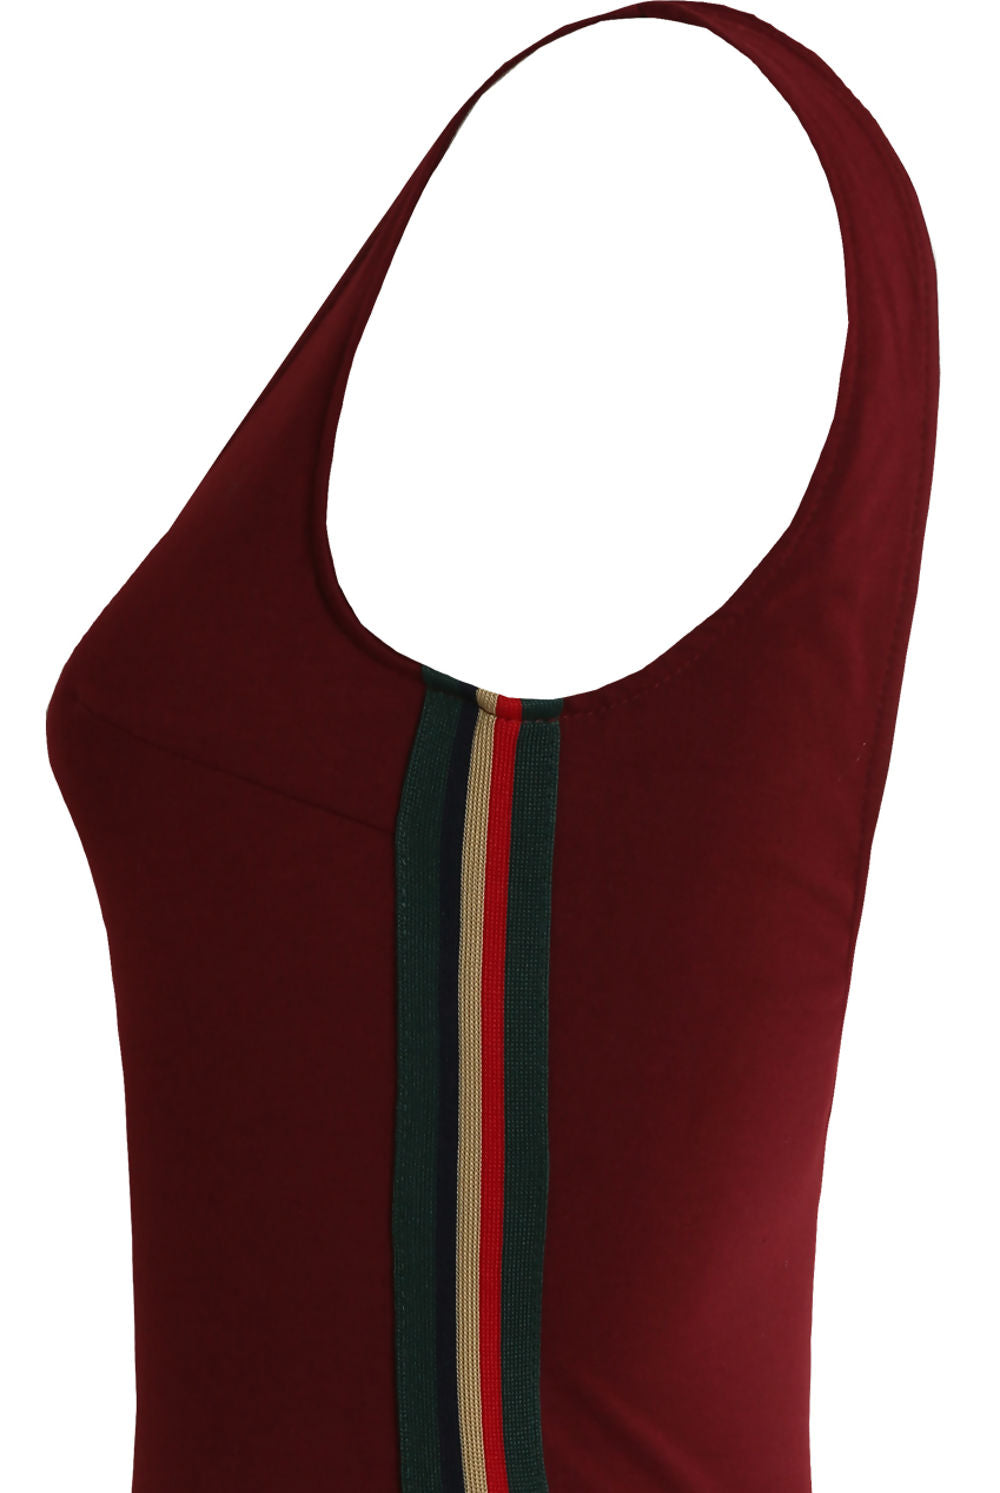 Wine Coloured Bodysuit With, Low Back and Side Pannelled Detail